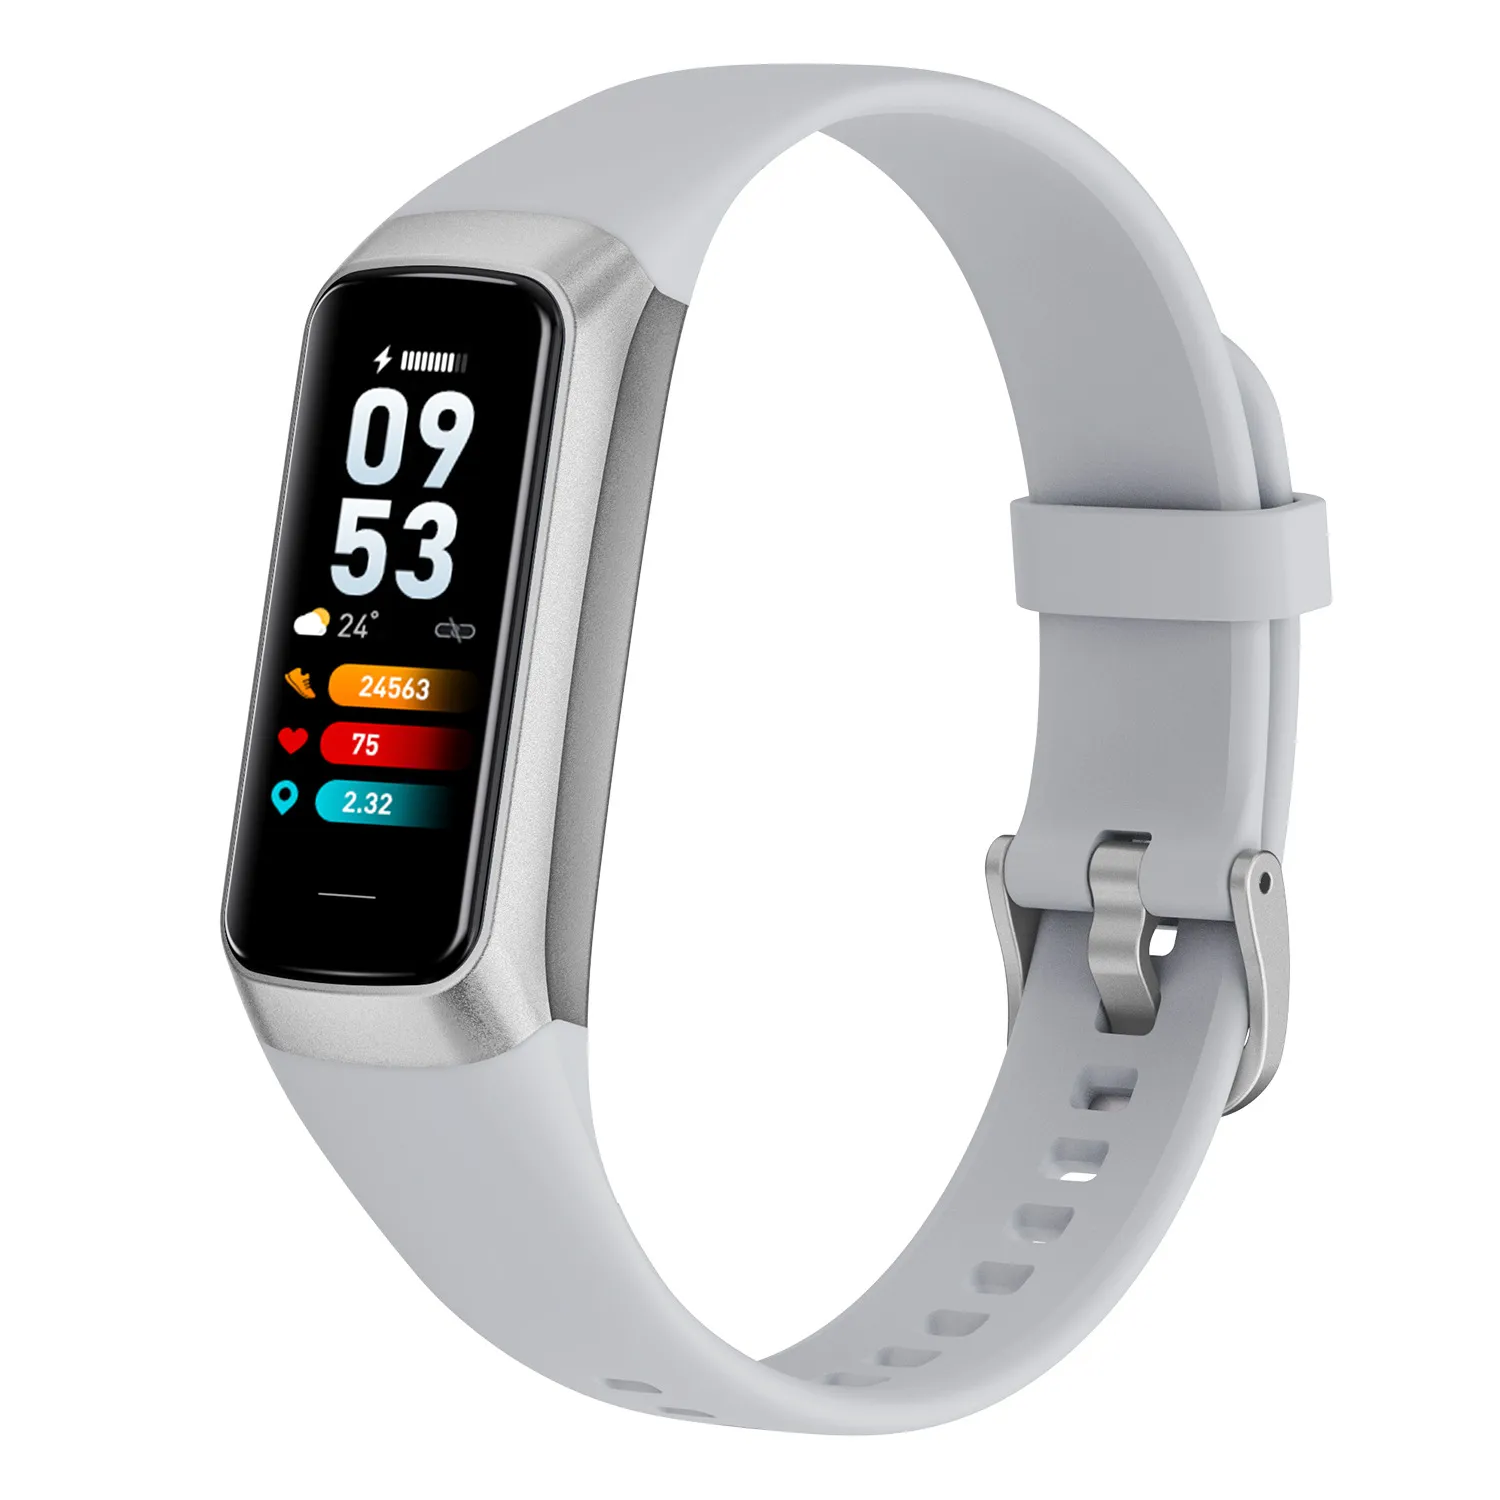 Buy Fitbit Charge Activity Wristband - Black online in India. Best prices,  Free shipping